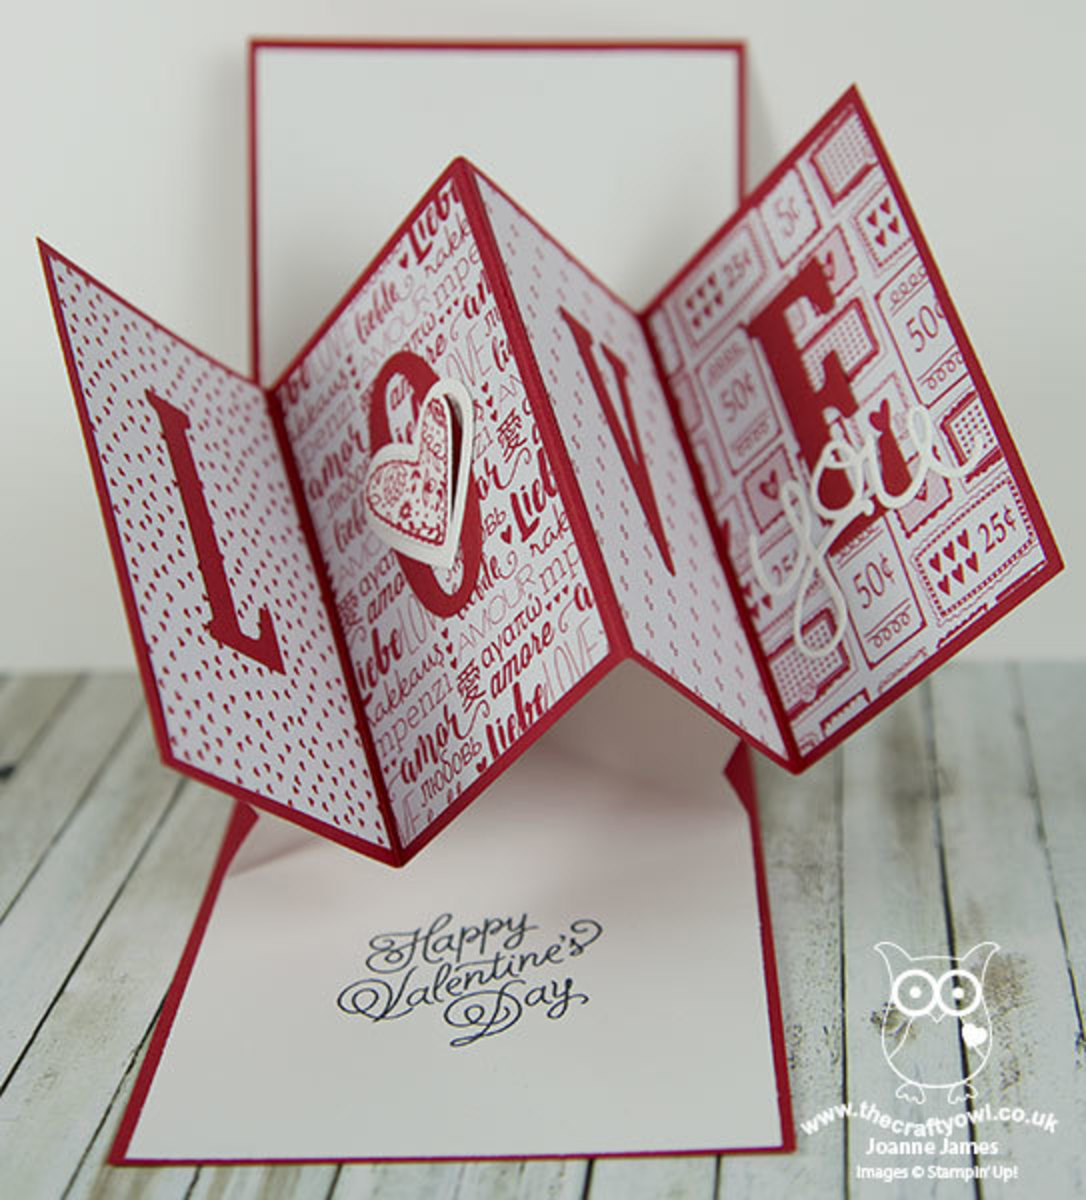 Twisted pop up cards can be an artful expression of your sentiments